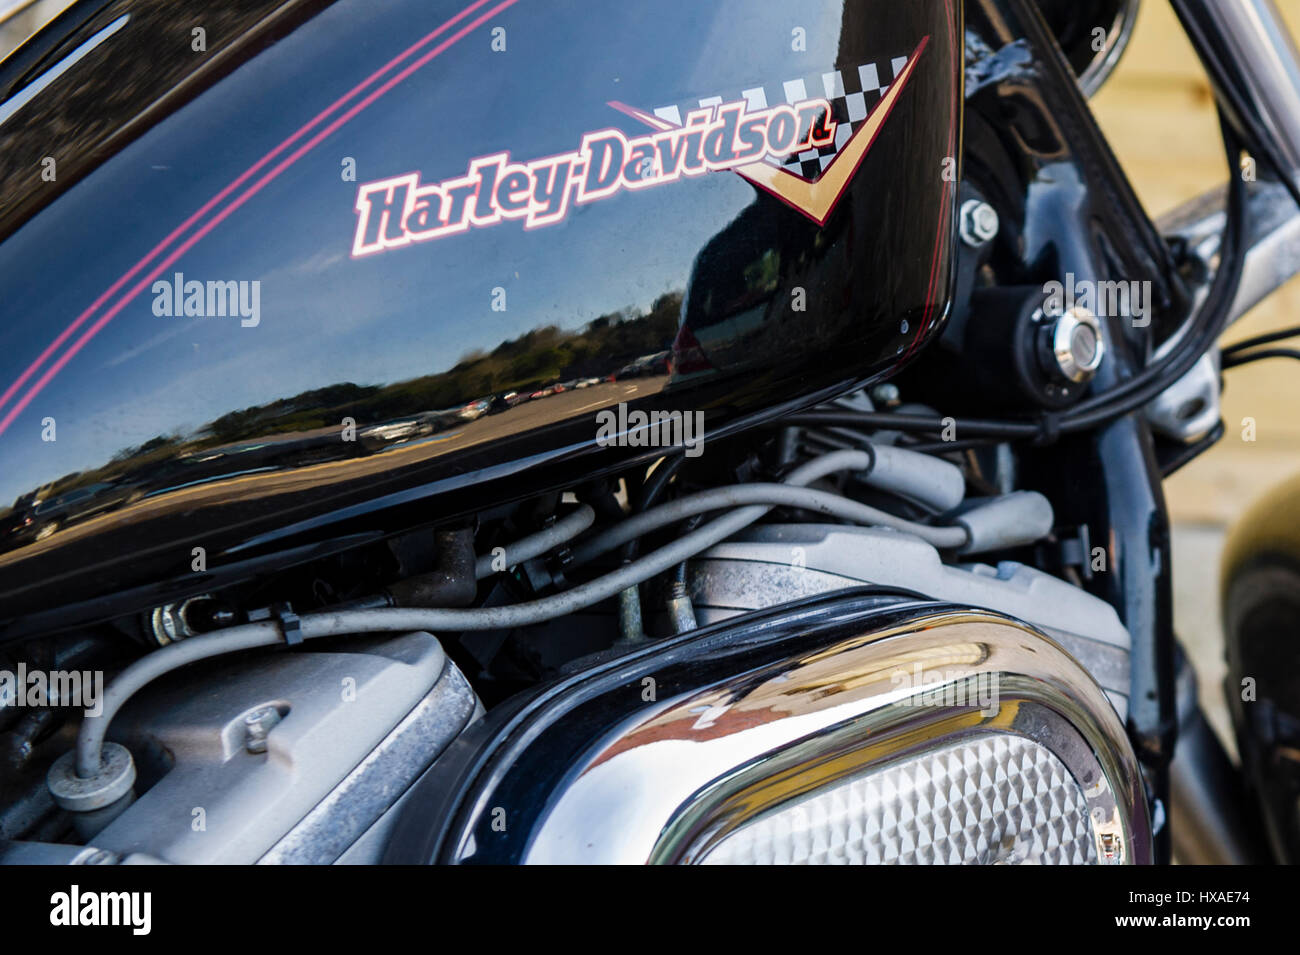 Fuel tank of a Harley Davidson motorbike or motorcycle. Stock Photo